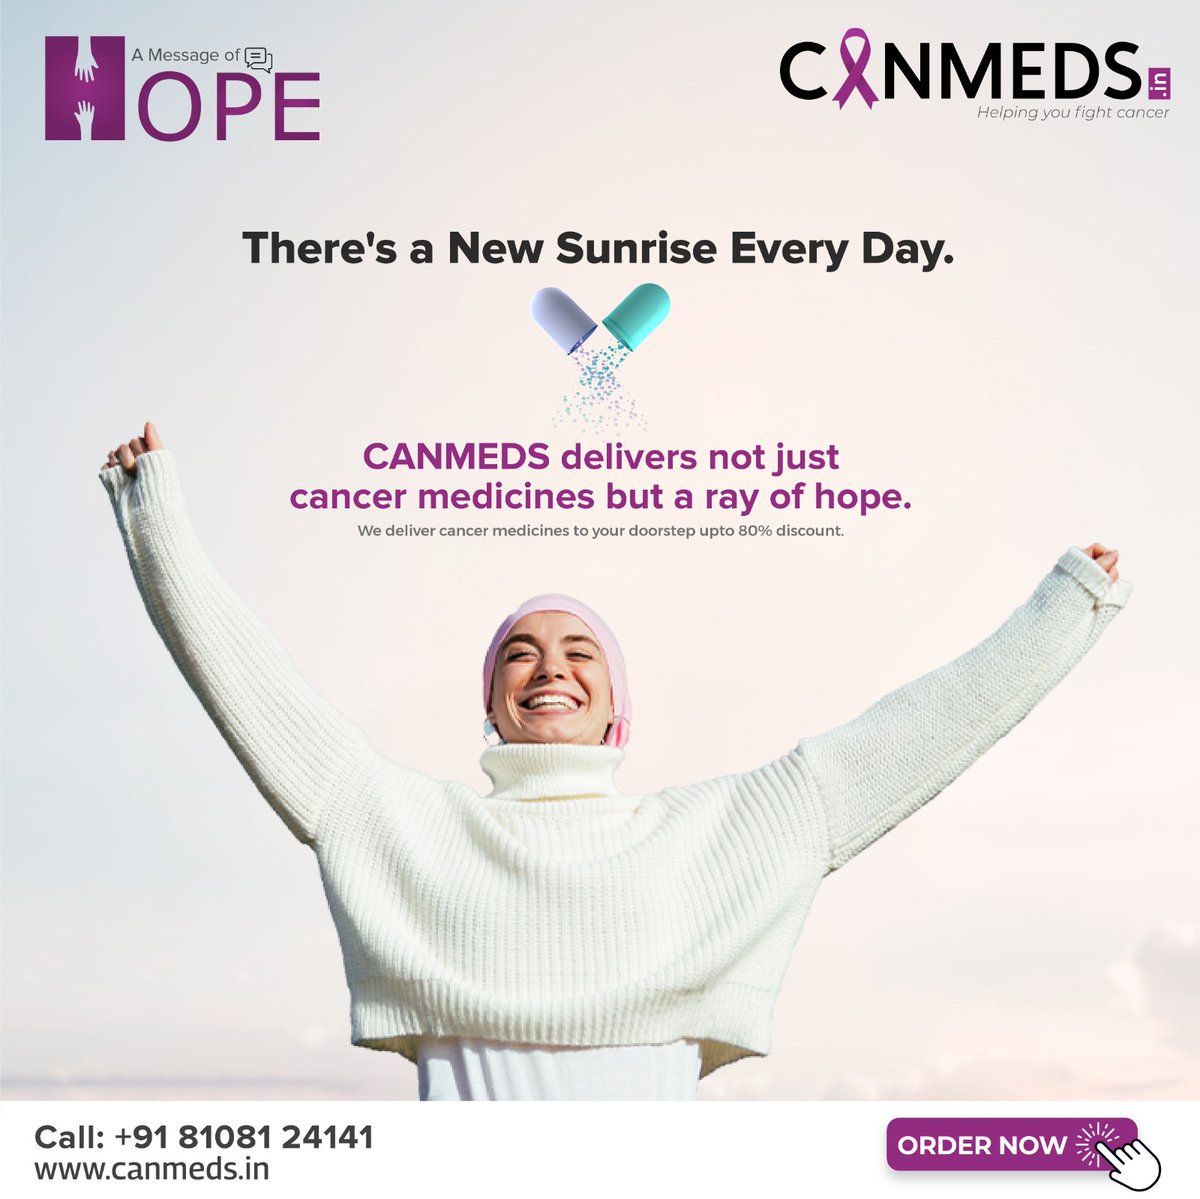 Sunrise: A Symbol of New Beginnings. CANMEDS delivers not just cancer medicines, but a promise of renewed hope and healing with the fastest delivery at your doorstep. Order your's today for an empowered recovery journey.

#Canmeds #CancerMeds #CancerMedicine #DoorStepDelivery